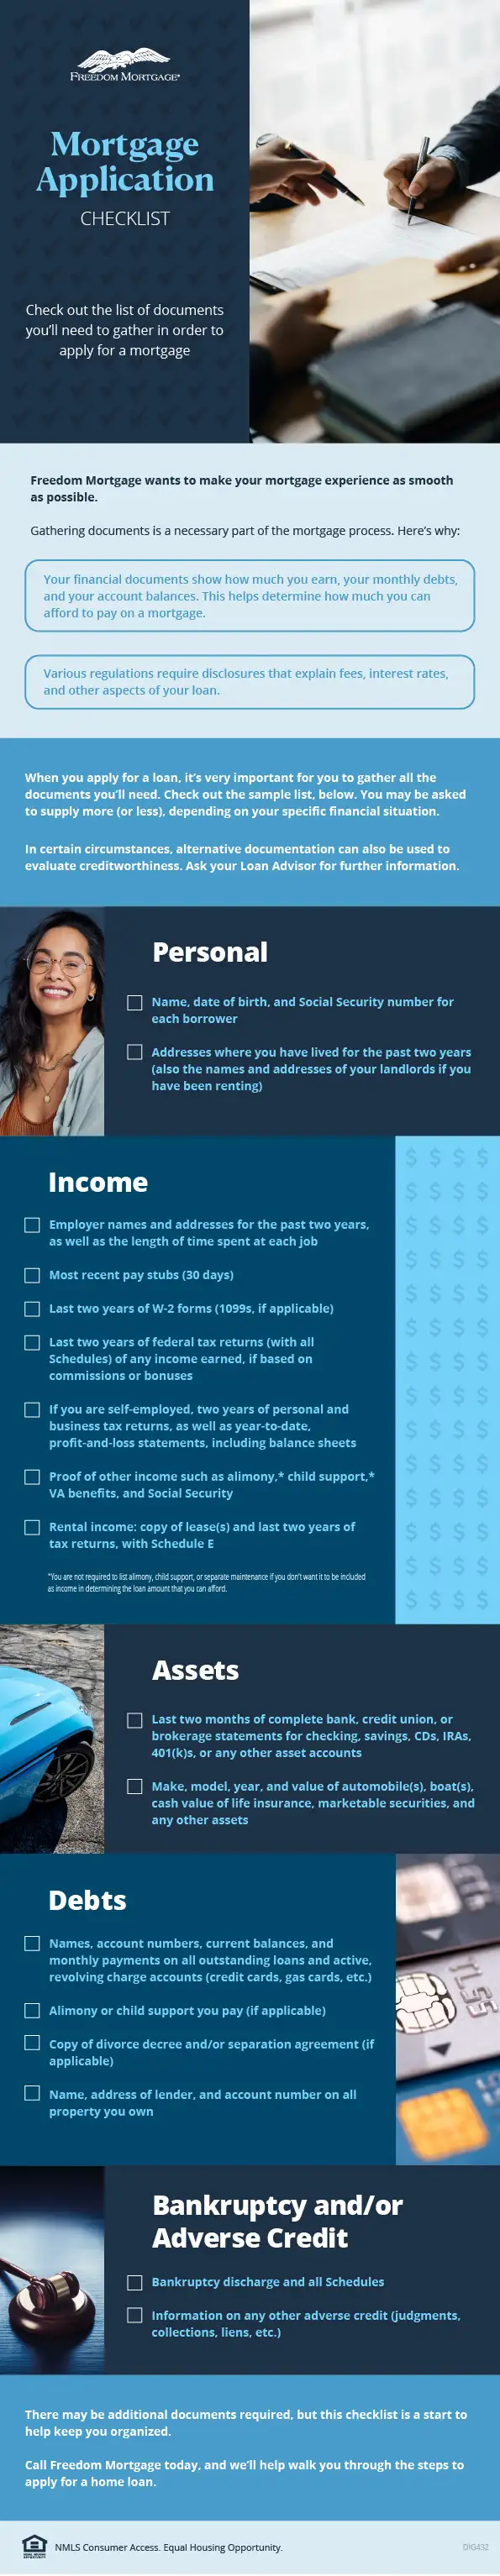 Mortgage Application Checklist infographic